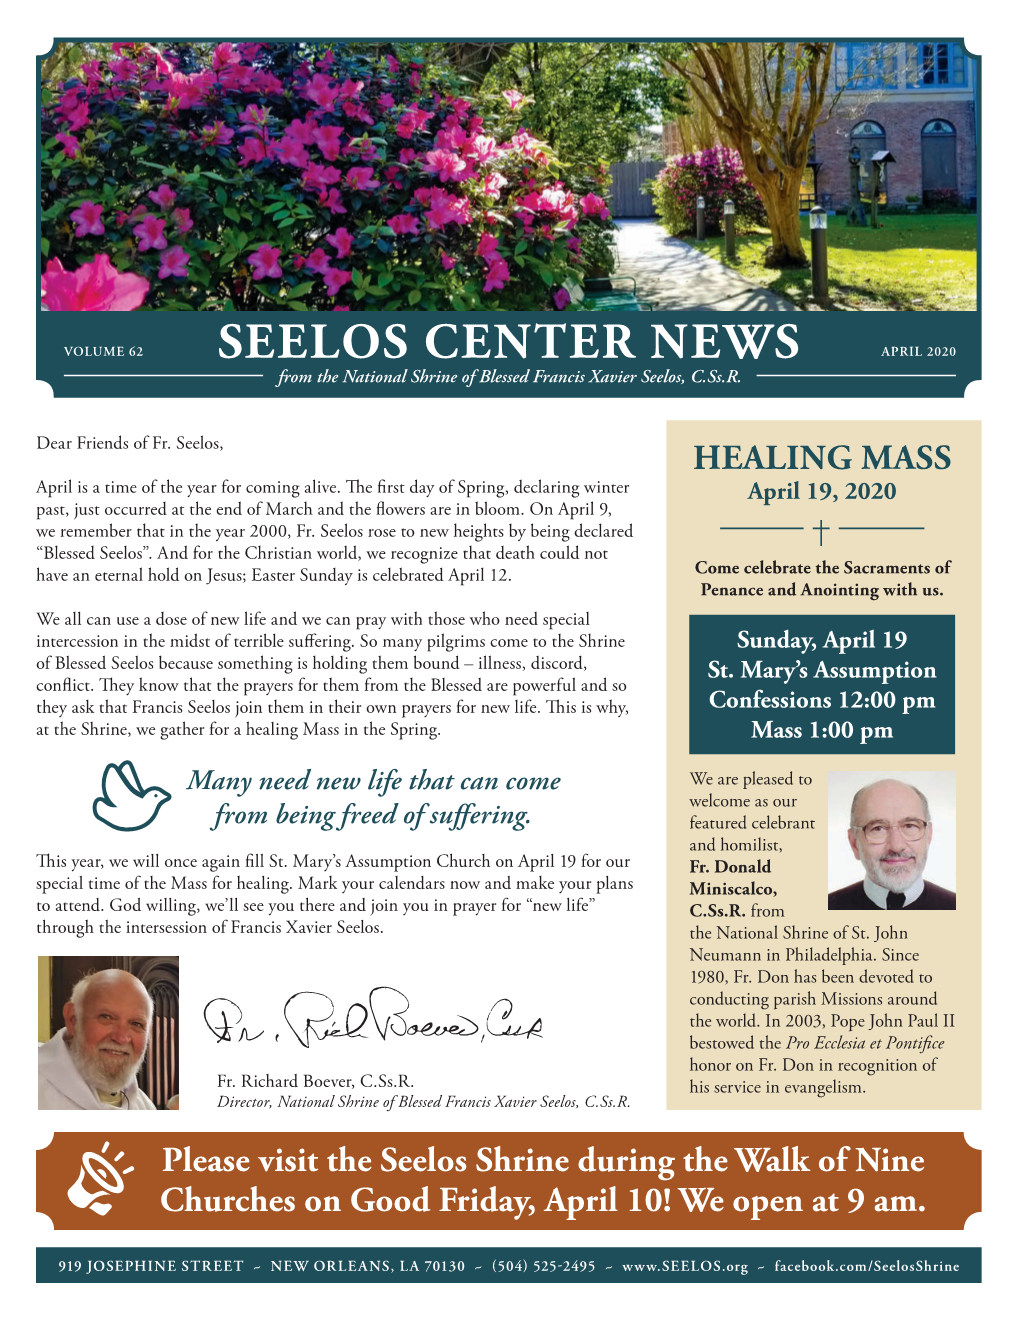 SEELOS CENTER NEWS APRIL 2020 from the National Shrine of Blessed Francis Xavier Seelos, C.Ss.R